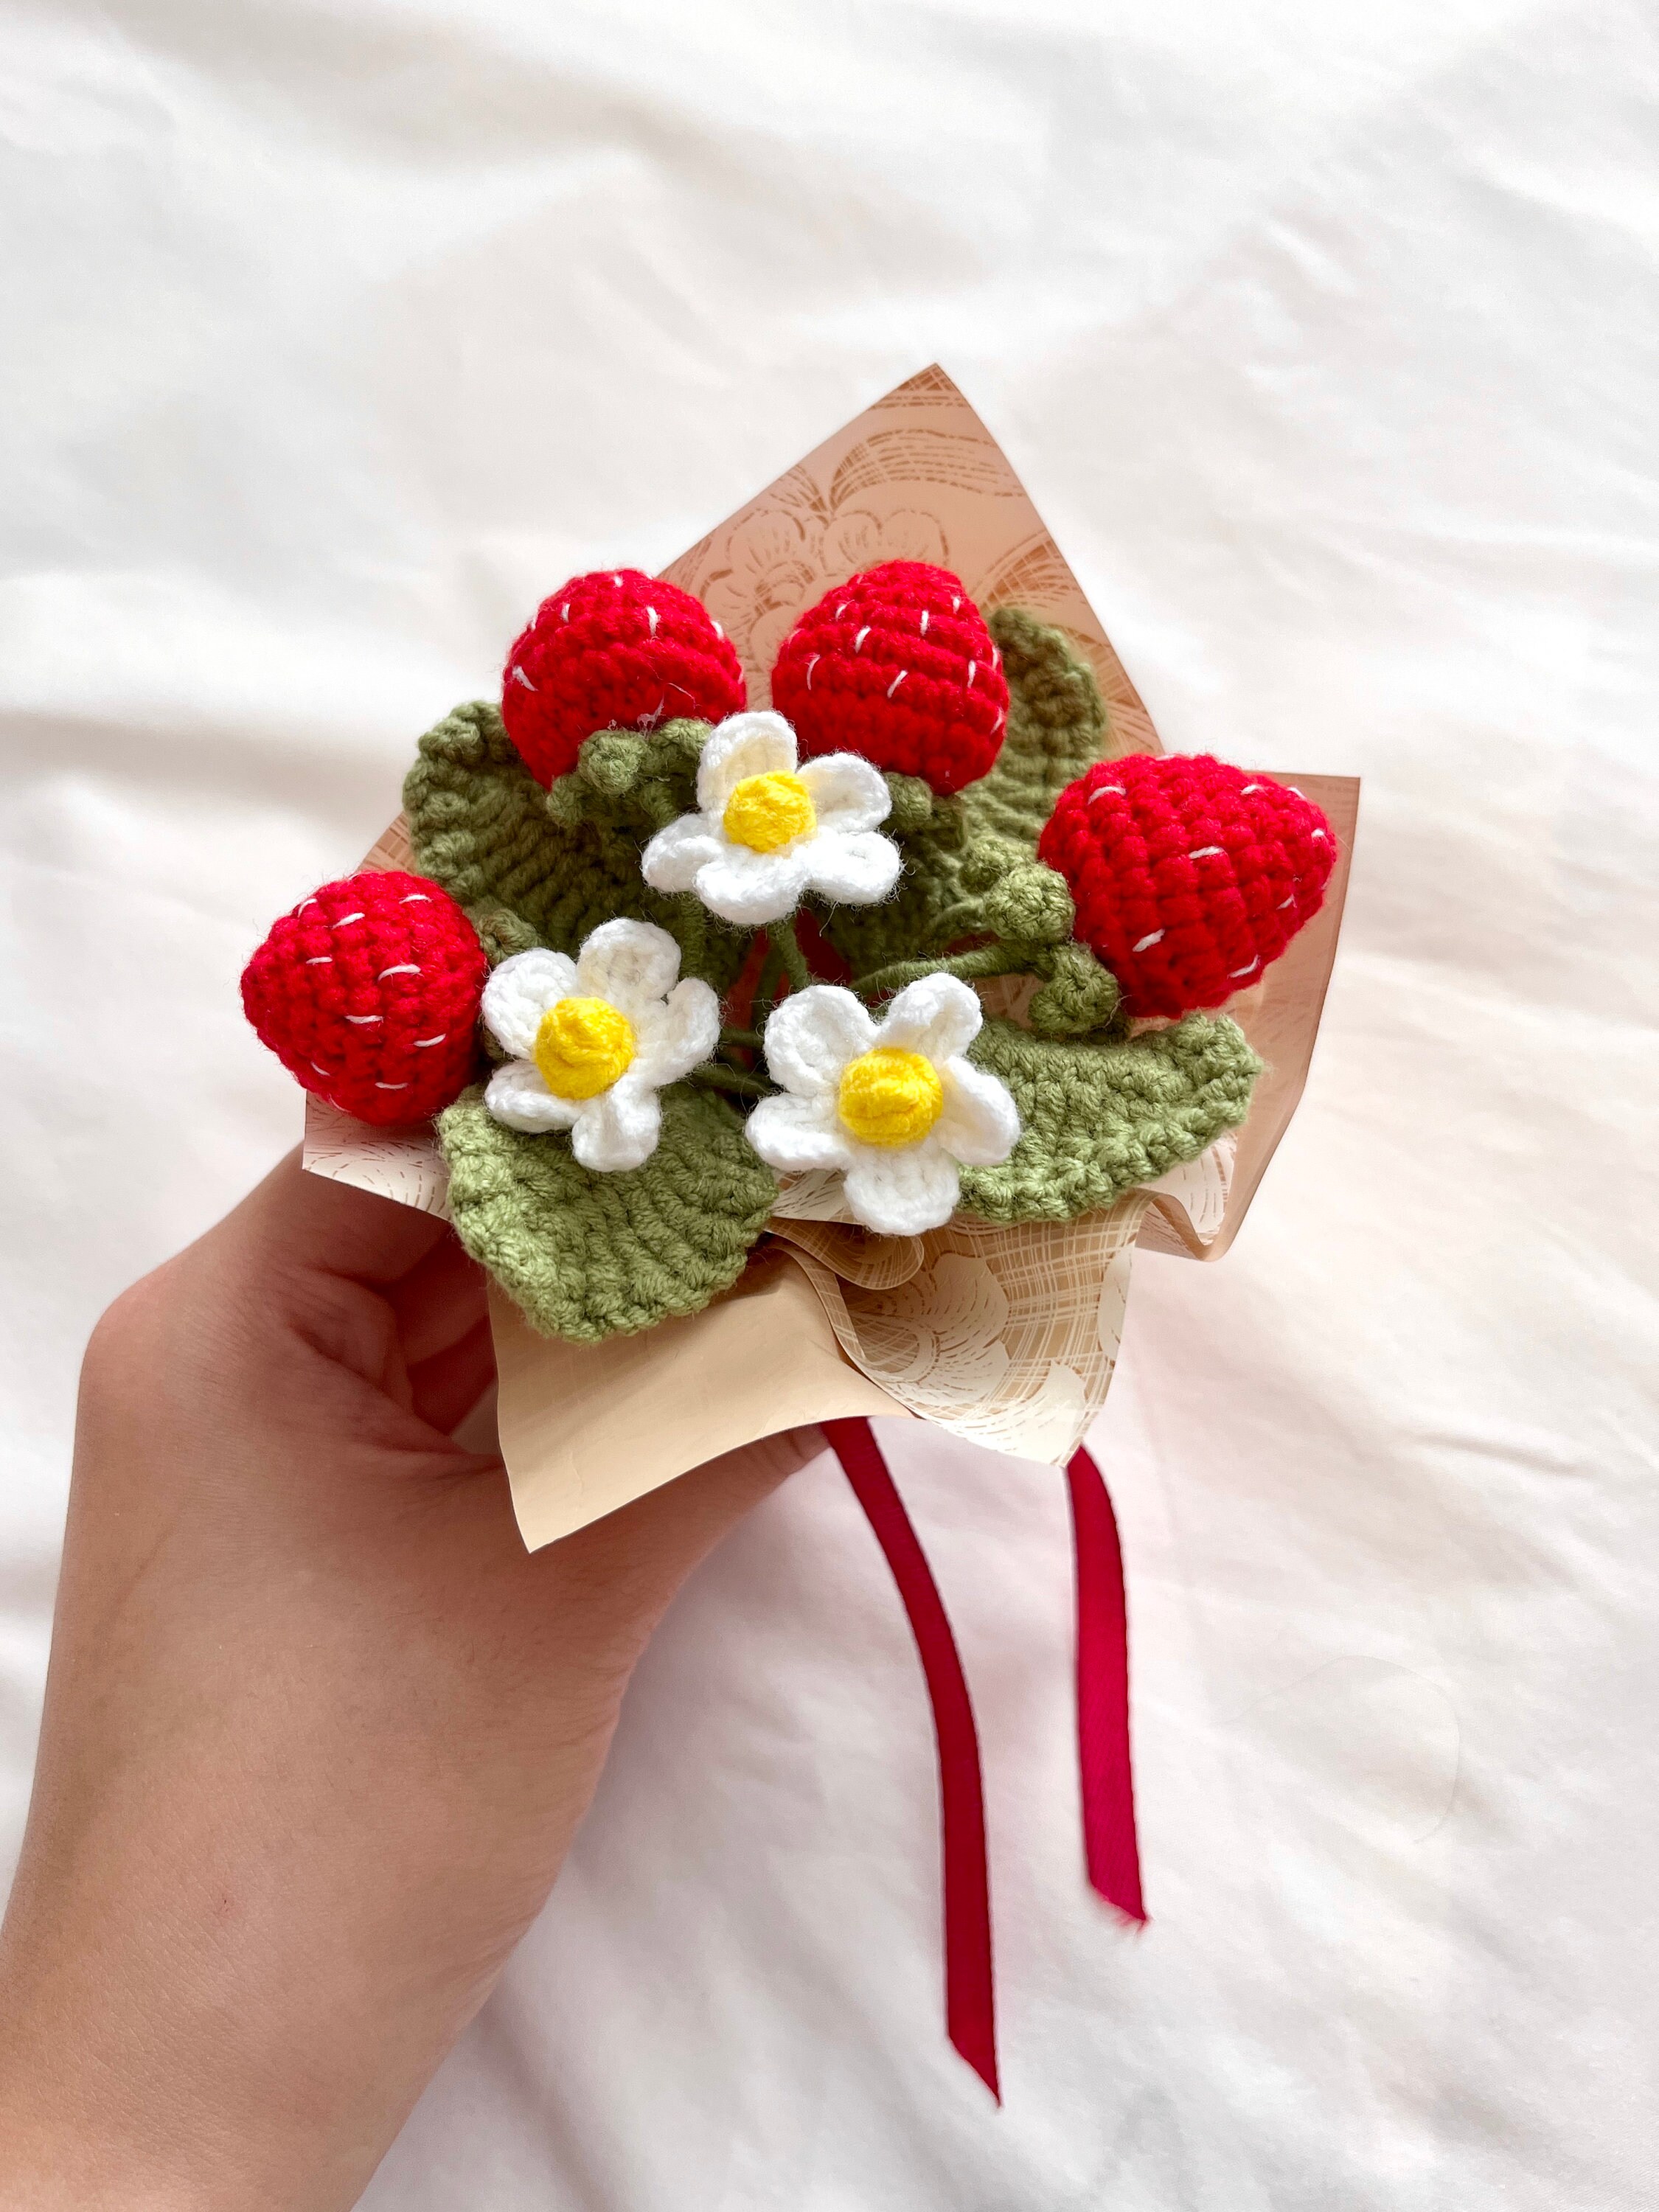 Handmade Crochet Strawberry Daisy Petite Bouquet Finished Product, Cute ...